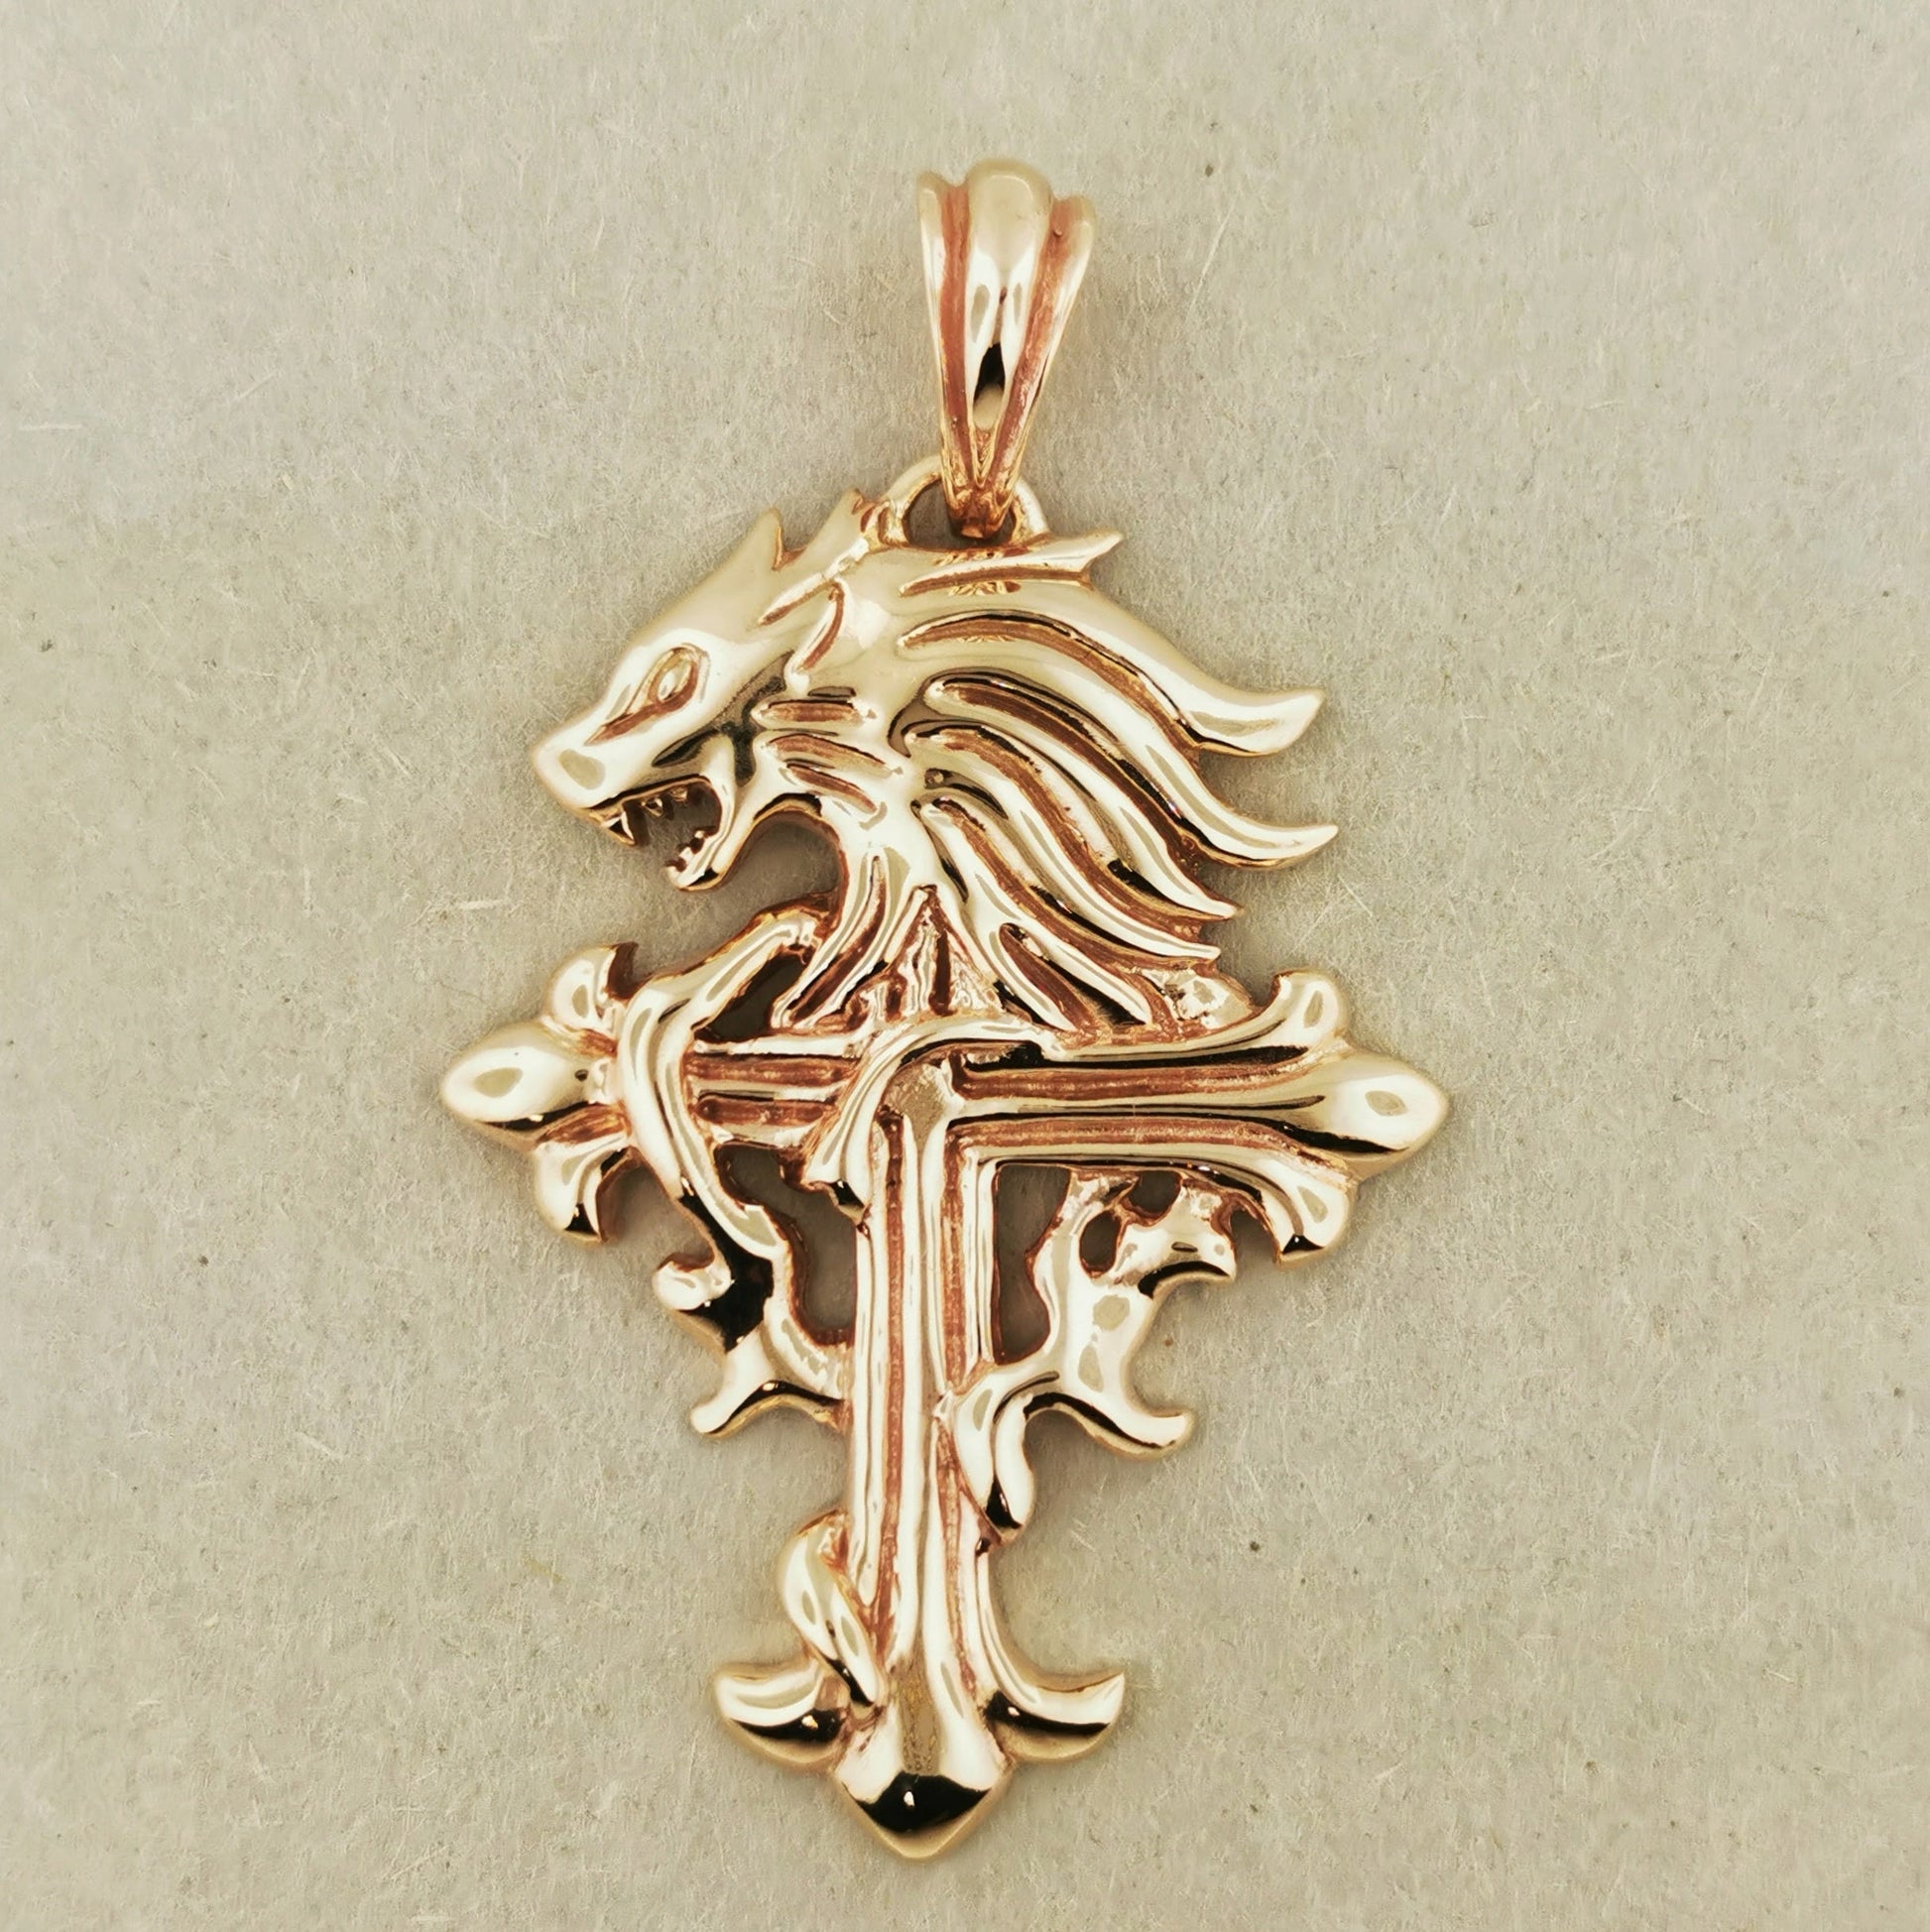 Final Fantasy 8 Squall Griever Pendant in Sterling Silver, FFVIII Cosplay Pendant, FFVIII Sleeping Lion Pendant, Gold squall leonhart pendant, gold final fantasy pendant, Gold final fantasy 8 pendant, Gold video game pendant, Gold griever lion pendant, Gold final fantasy jewelry